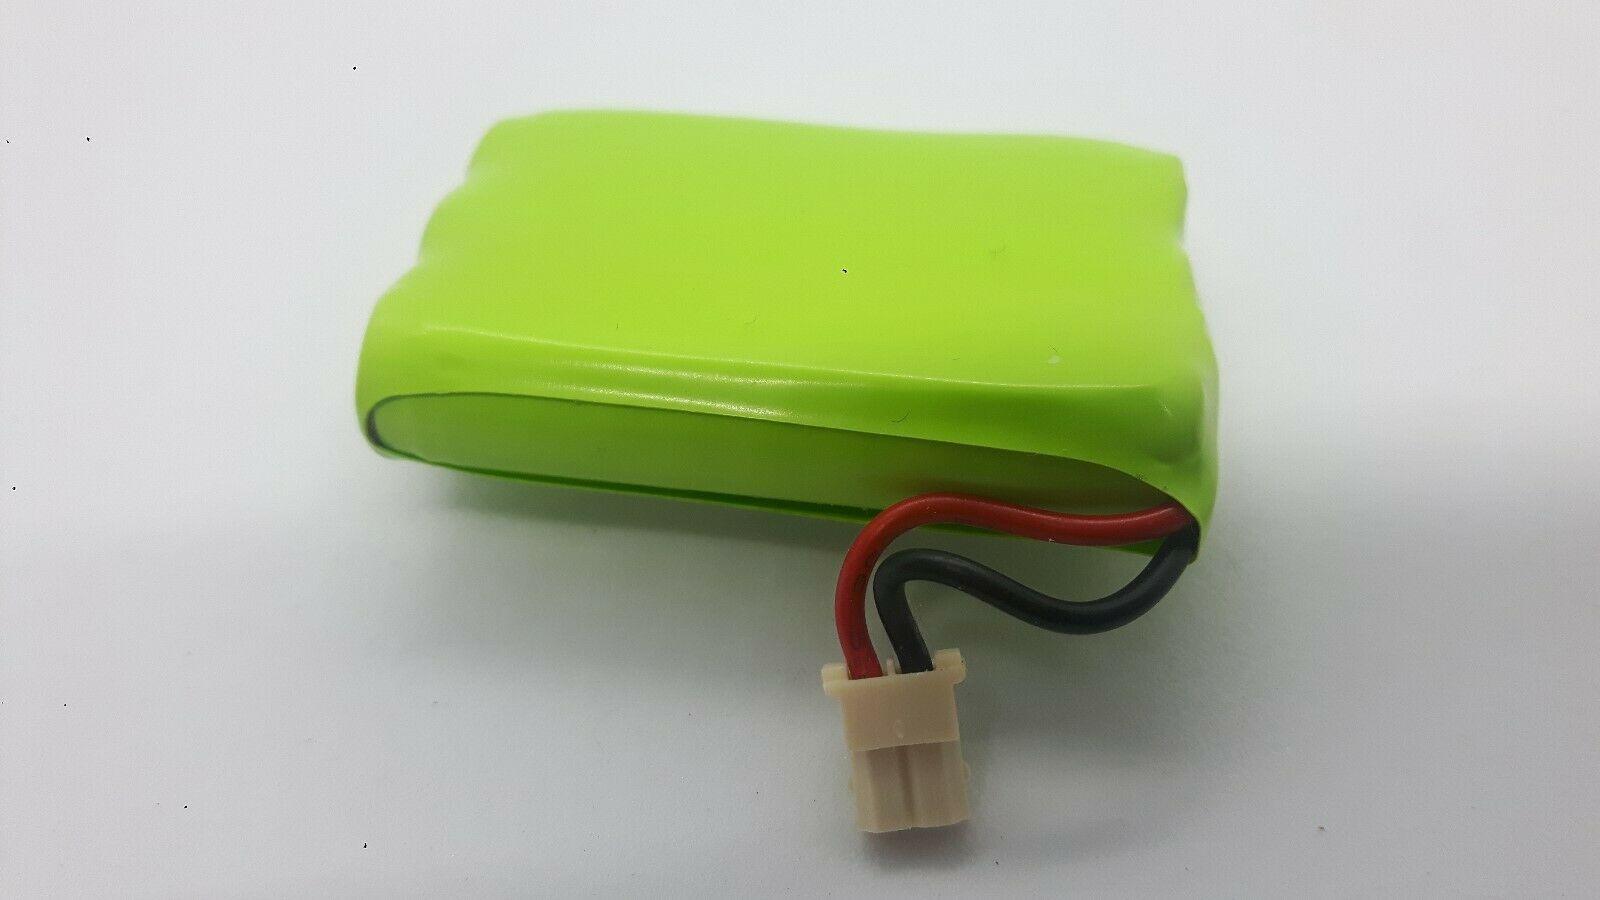 Replacement GP80AAAHC3BMXZ HRMR03 3.6V 800mAh Ni-MH Battery - Office Catch